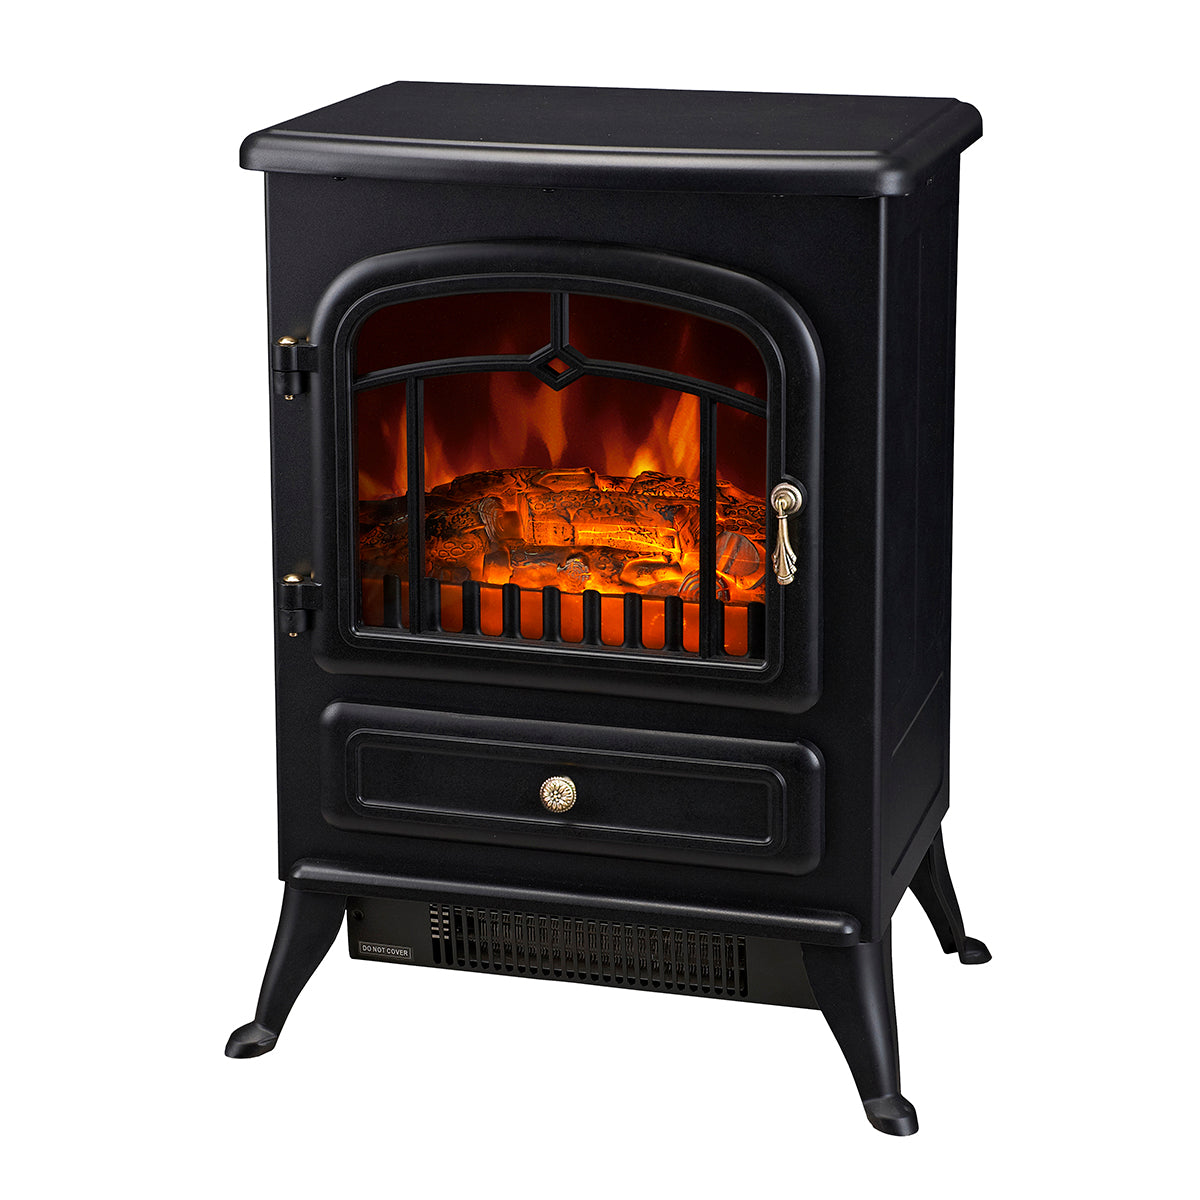 Electric log fire Fireplace Heater with flickering warm-orange "flames".